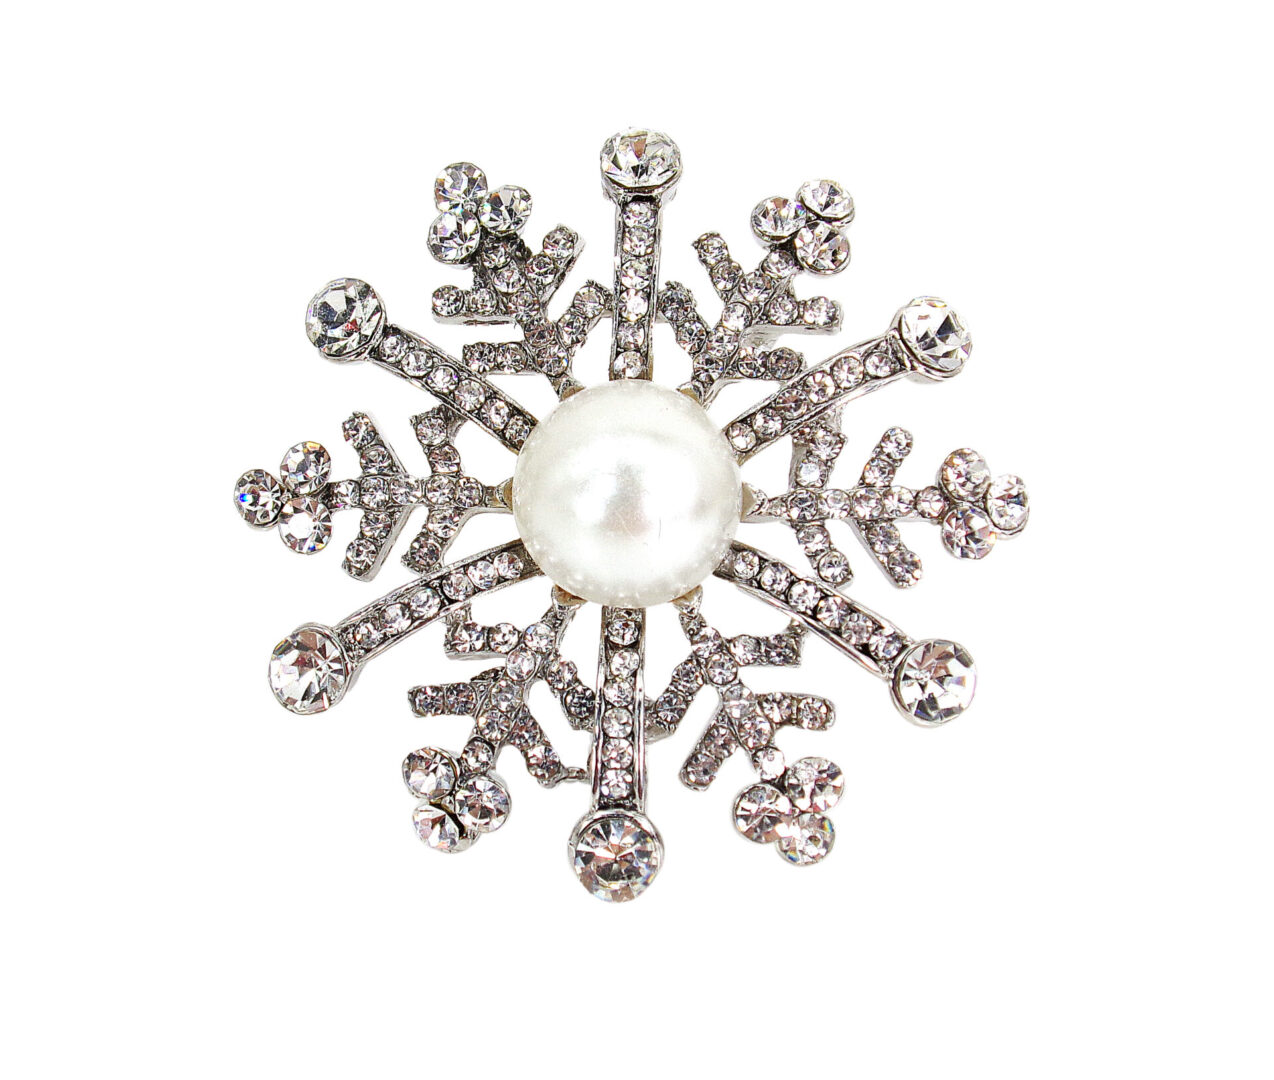 A crystal and pearl snowflake pin jewelry piece